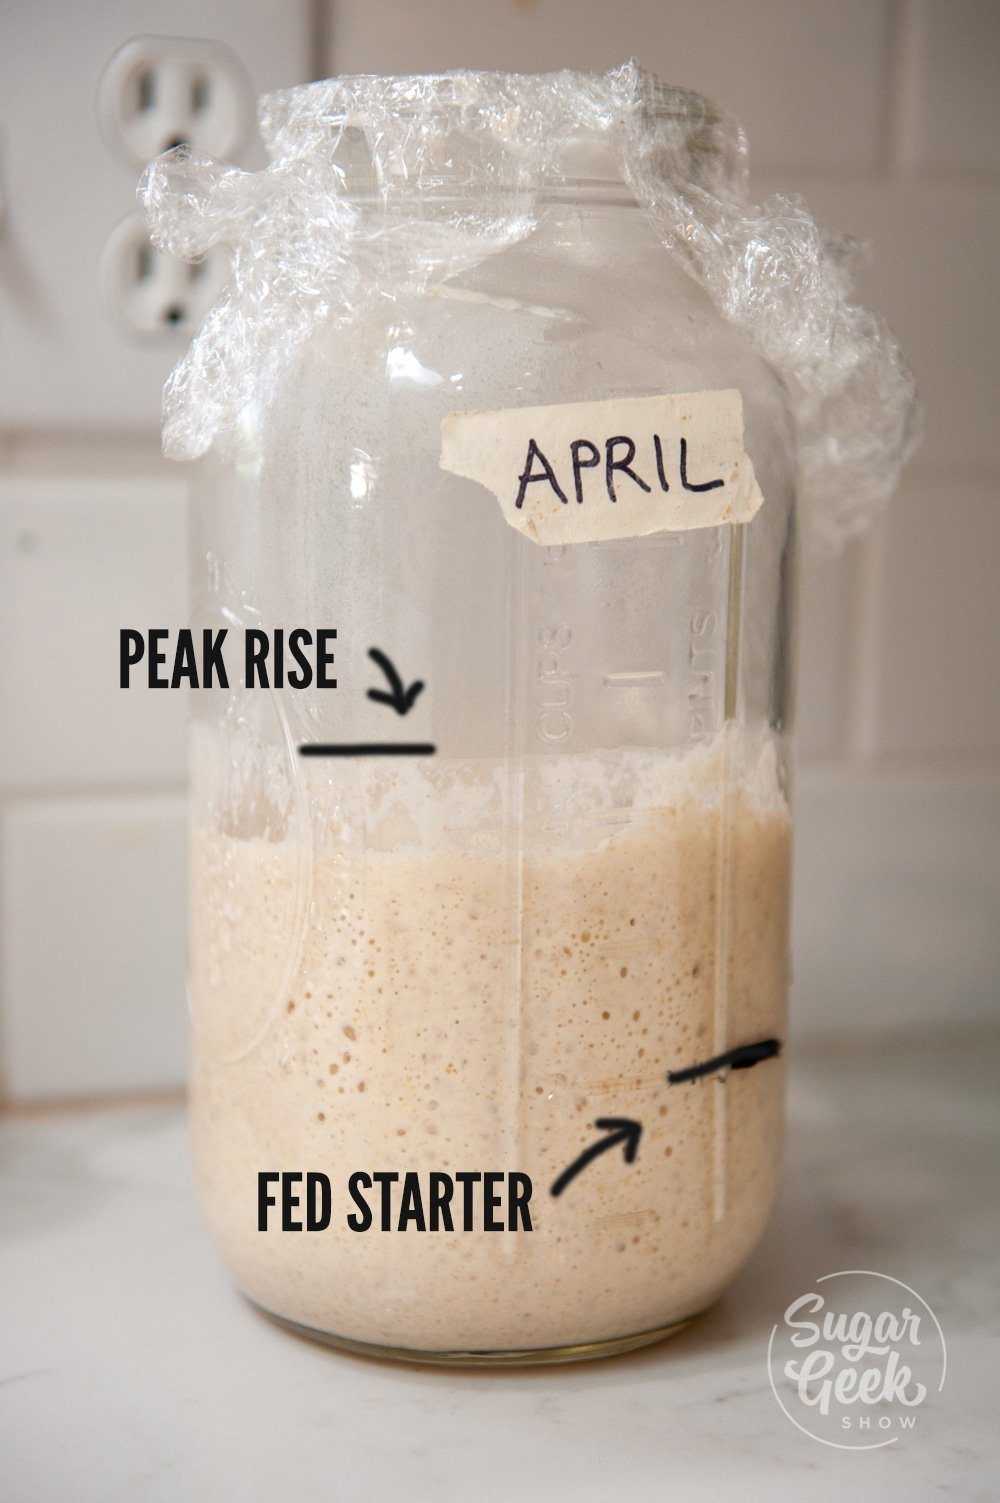 jar of sourdough starter with lines drawn on front to indicate peak rise